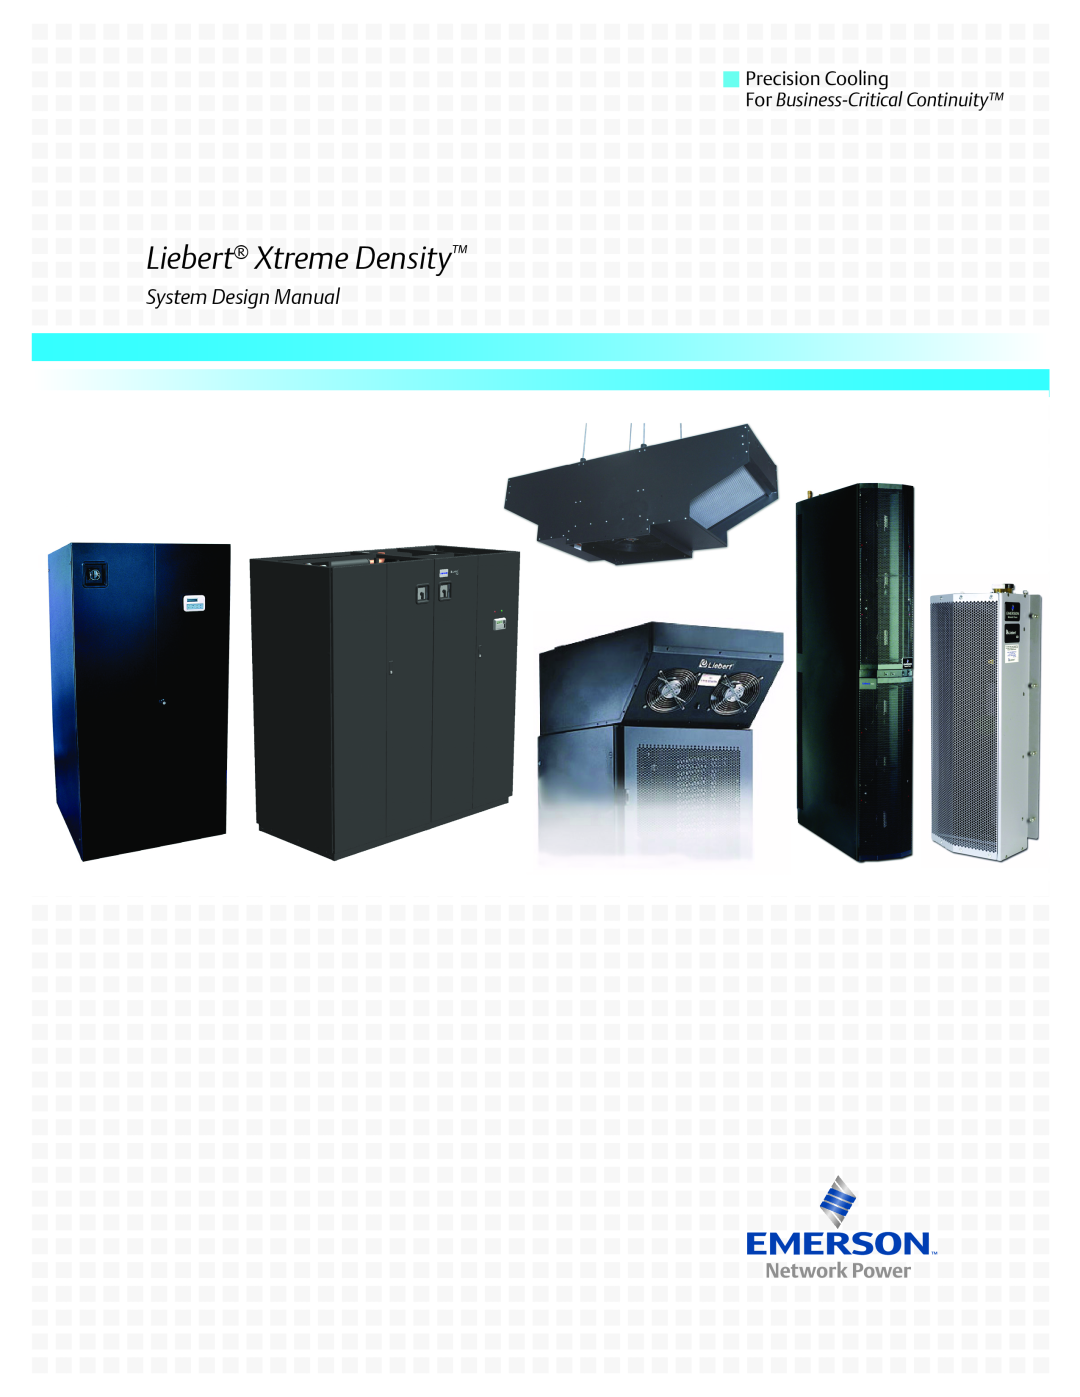 Emerson manual Liebert Xtreme Density, System Design Manual, Precision Cooling, For Business-Critical Continuity 